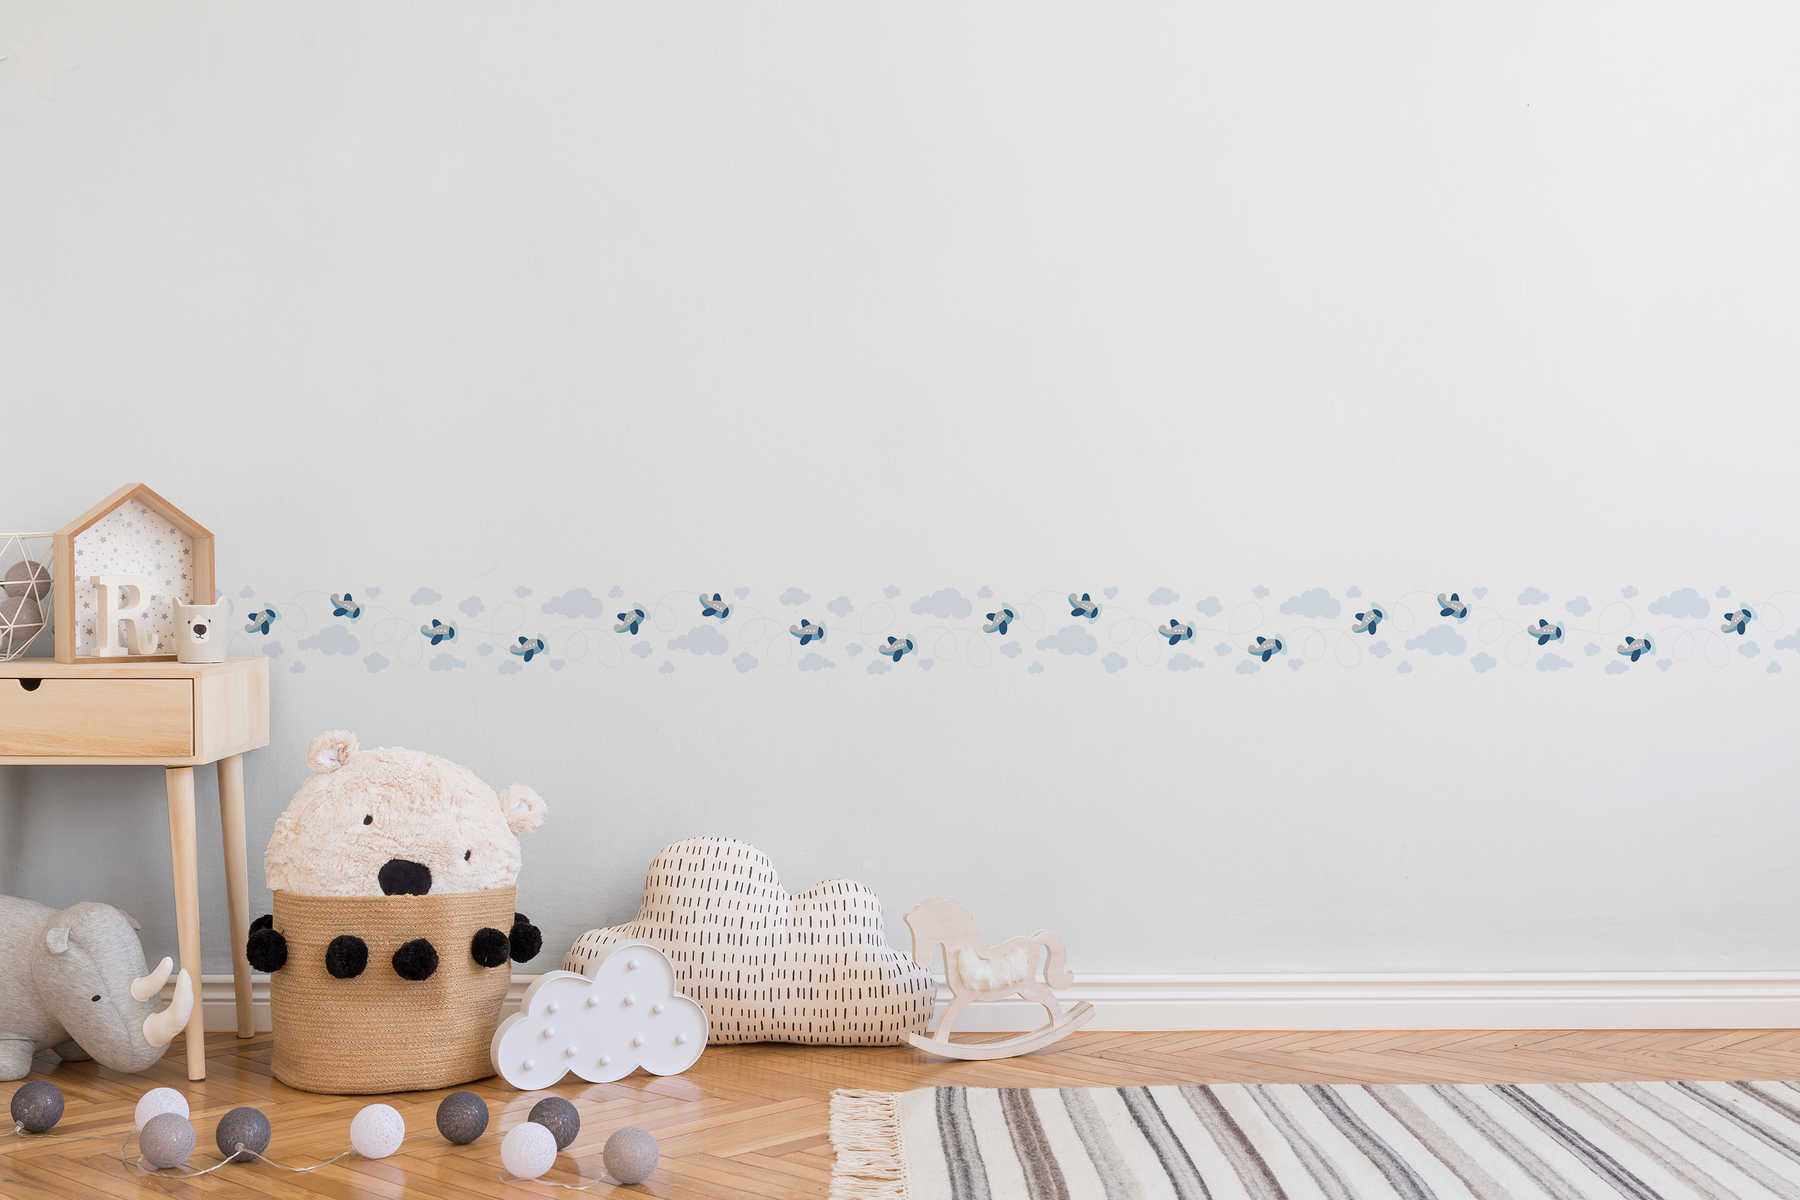             Airy views baby room border for boys - blue, grey, white
        